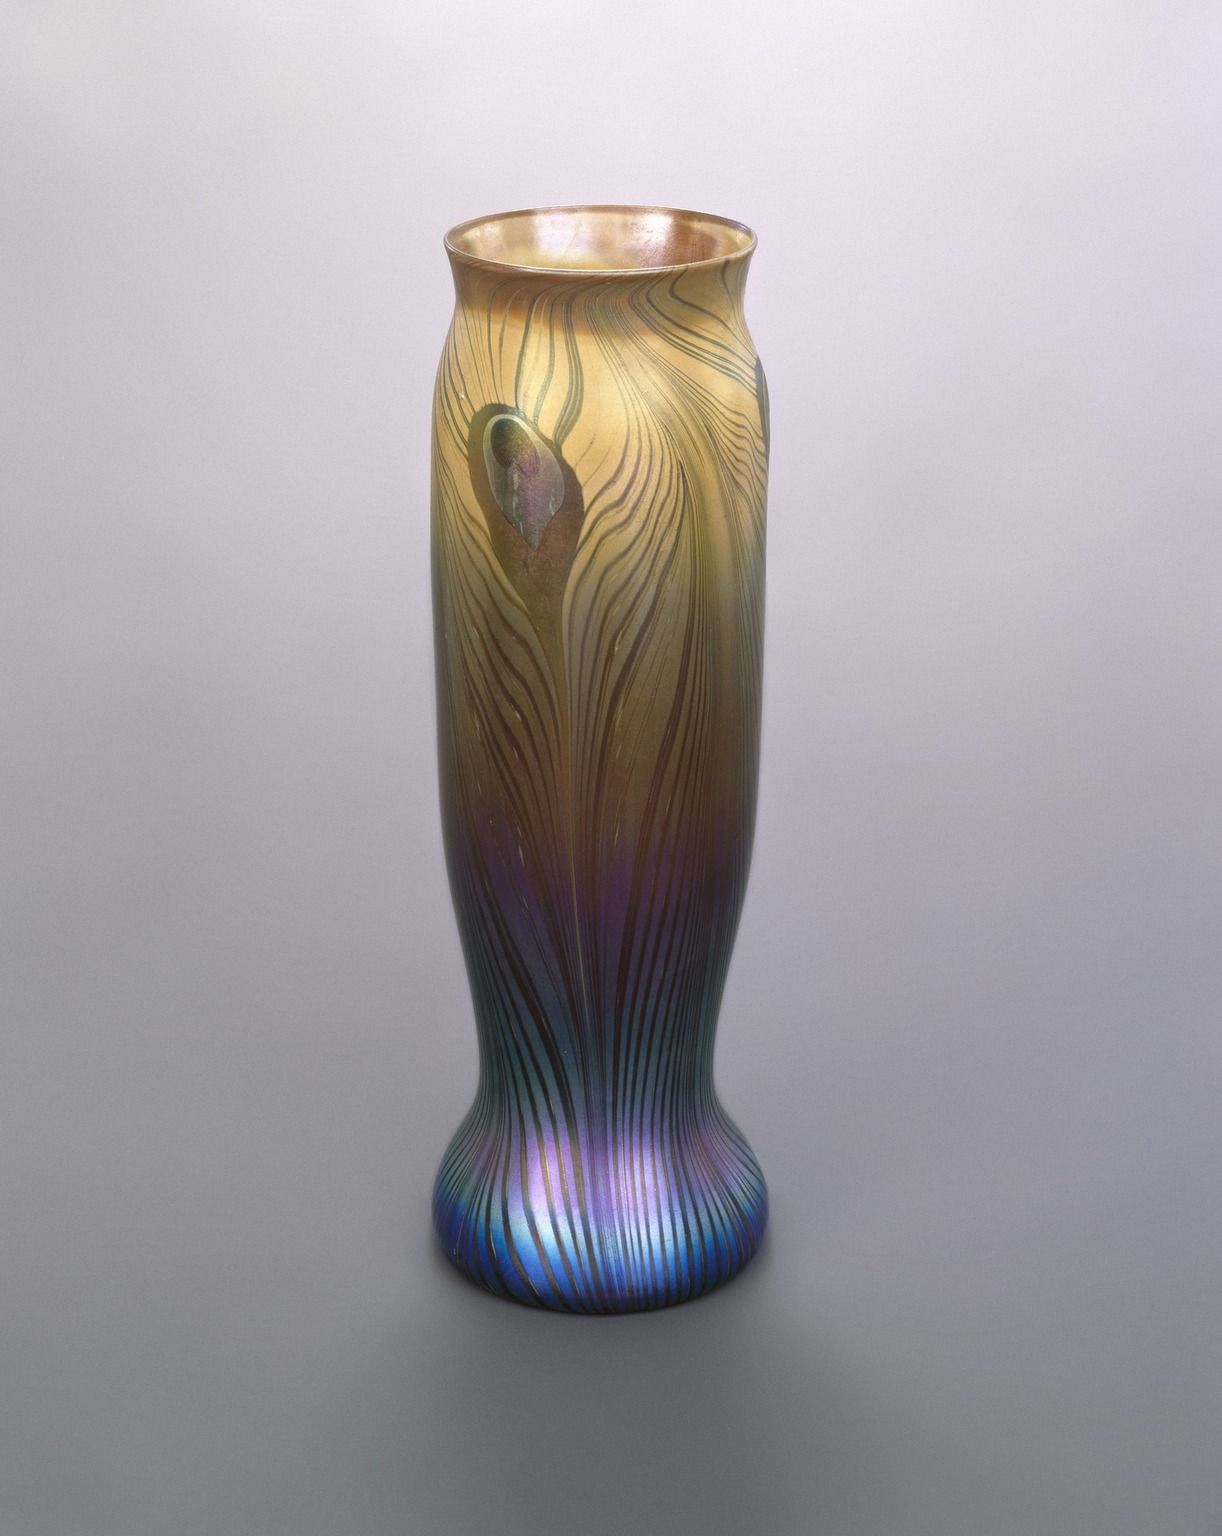 Vase, c.1900 (favrile glass) by Louis Comfort Tiffany